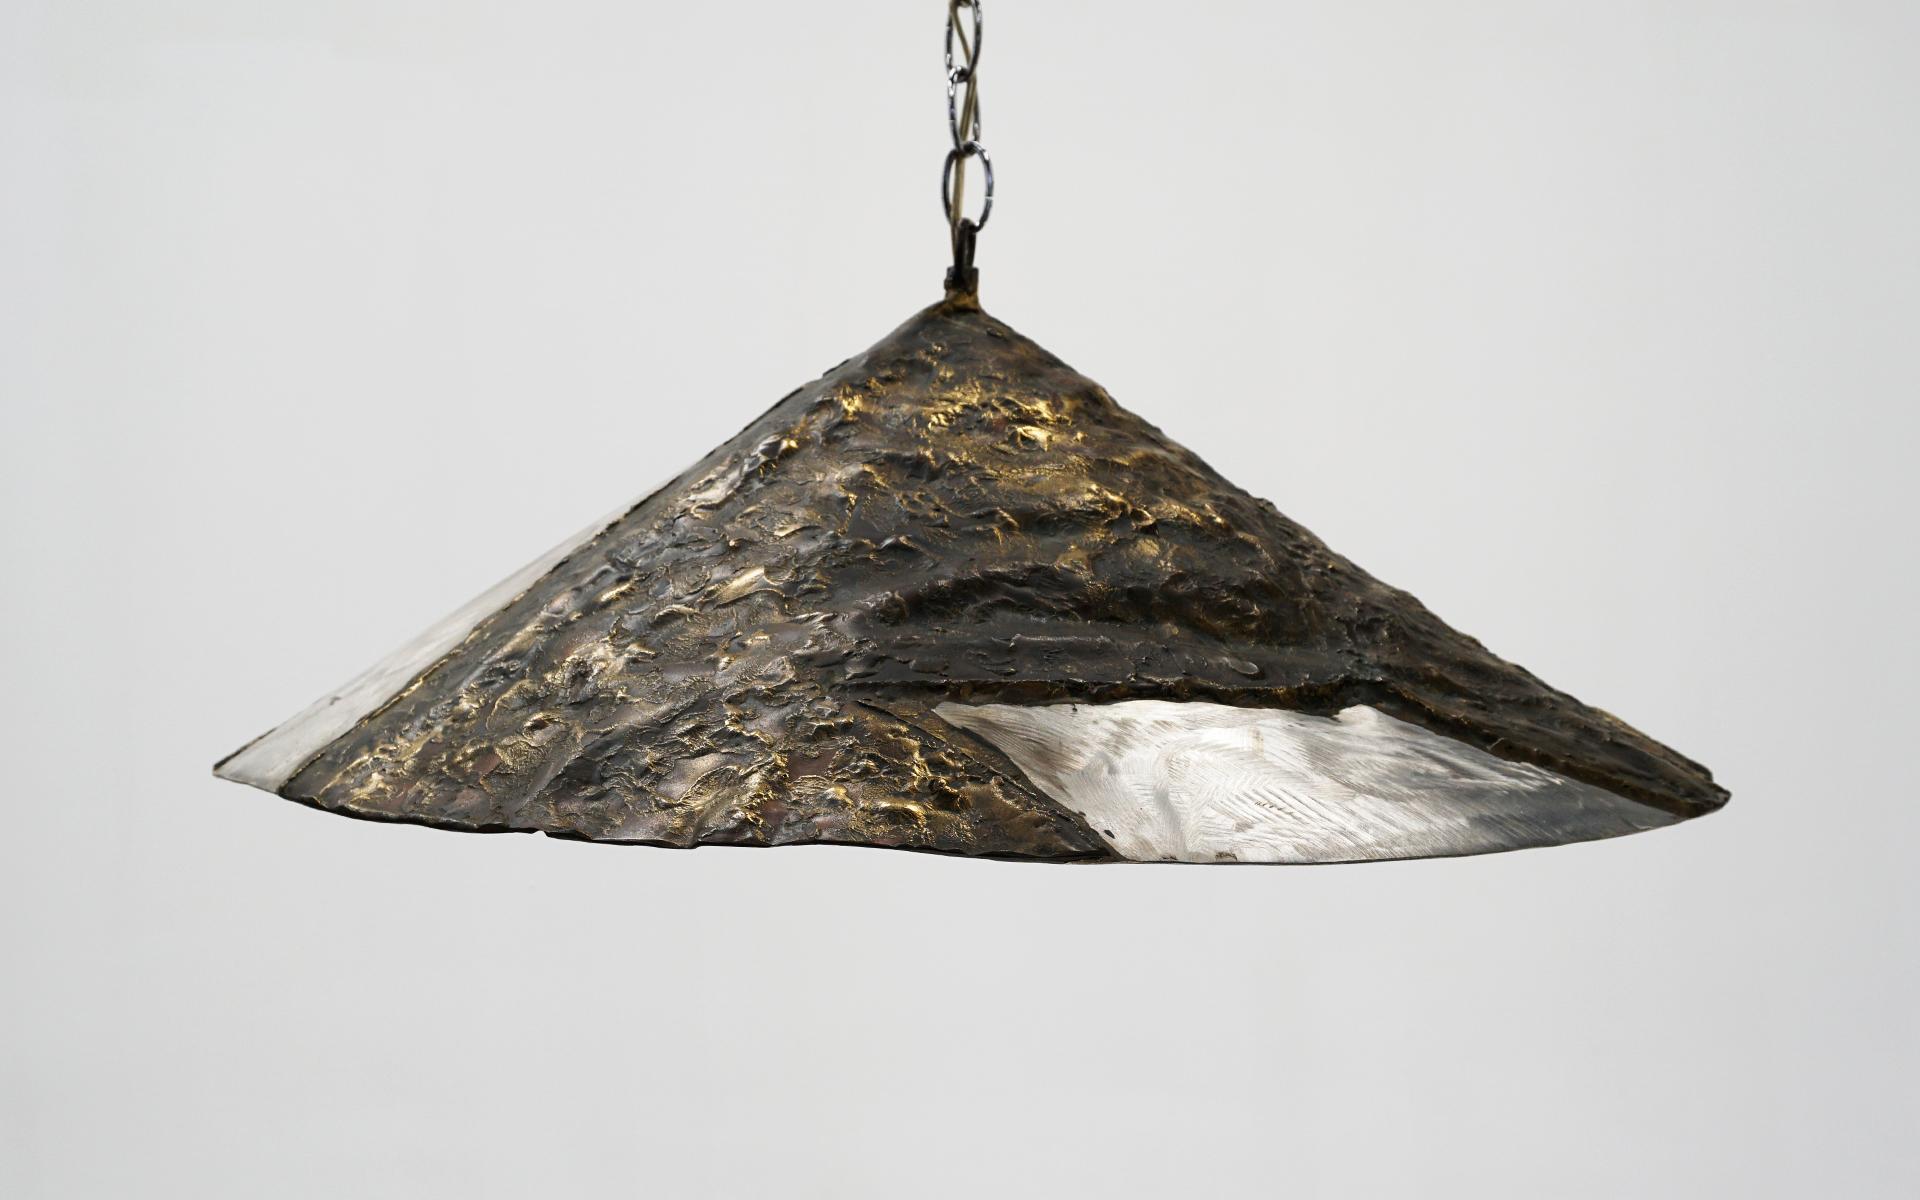 Mid-Century Modern Silas Seandel Pendant Light, Patinated Brass and Aluminum, Etched Signature For Sale